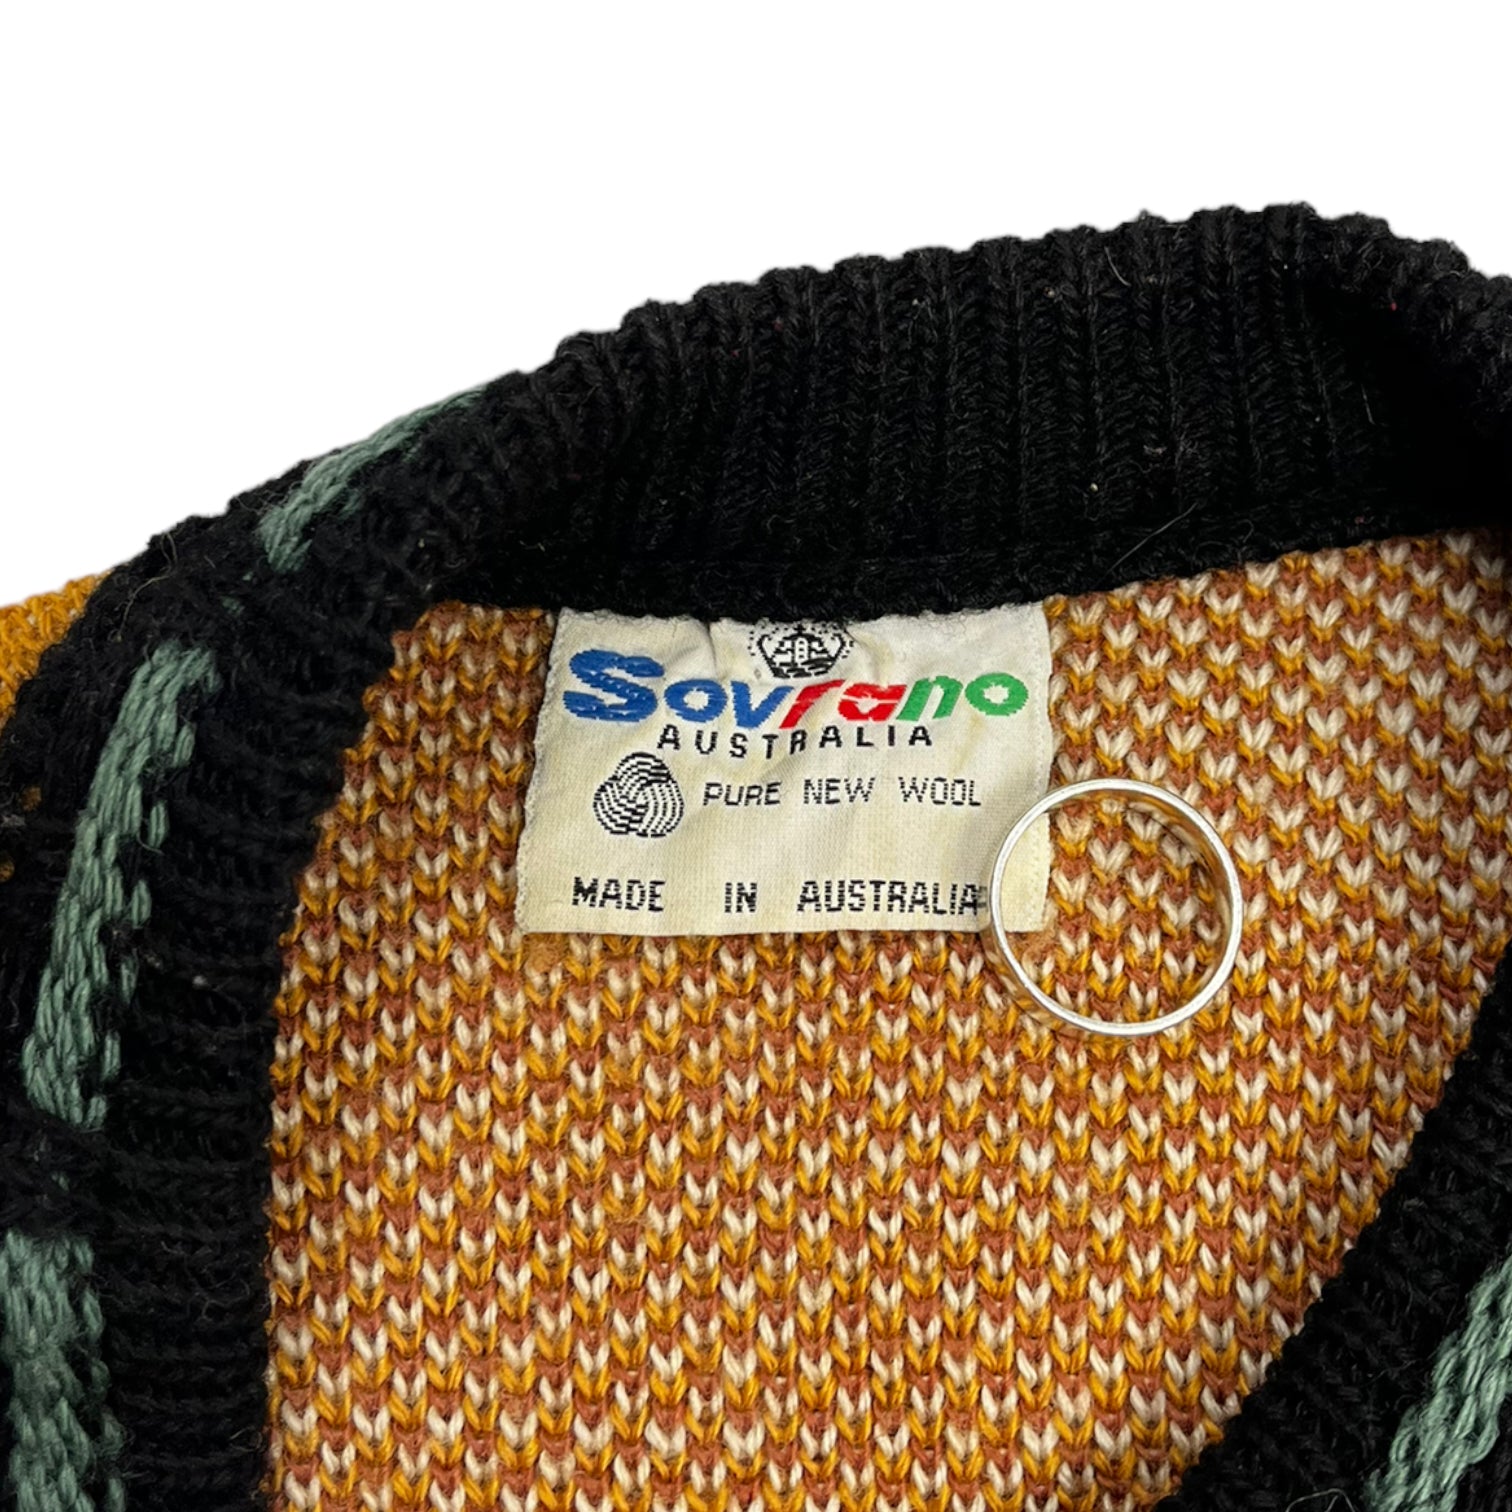 Vintage Sovrano Mixed Patterned Knit